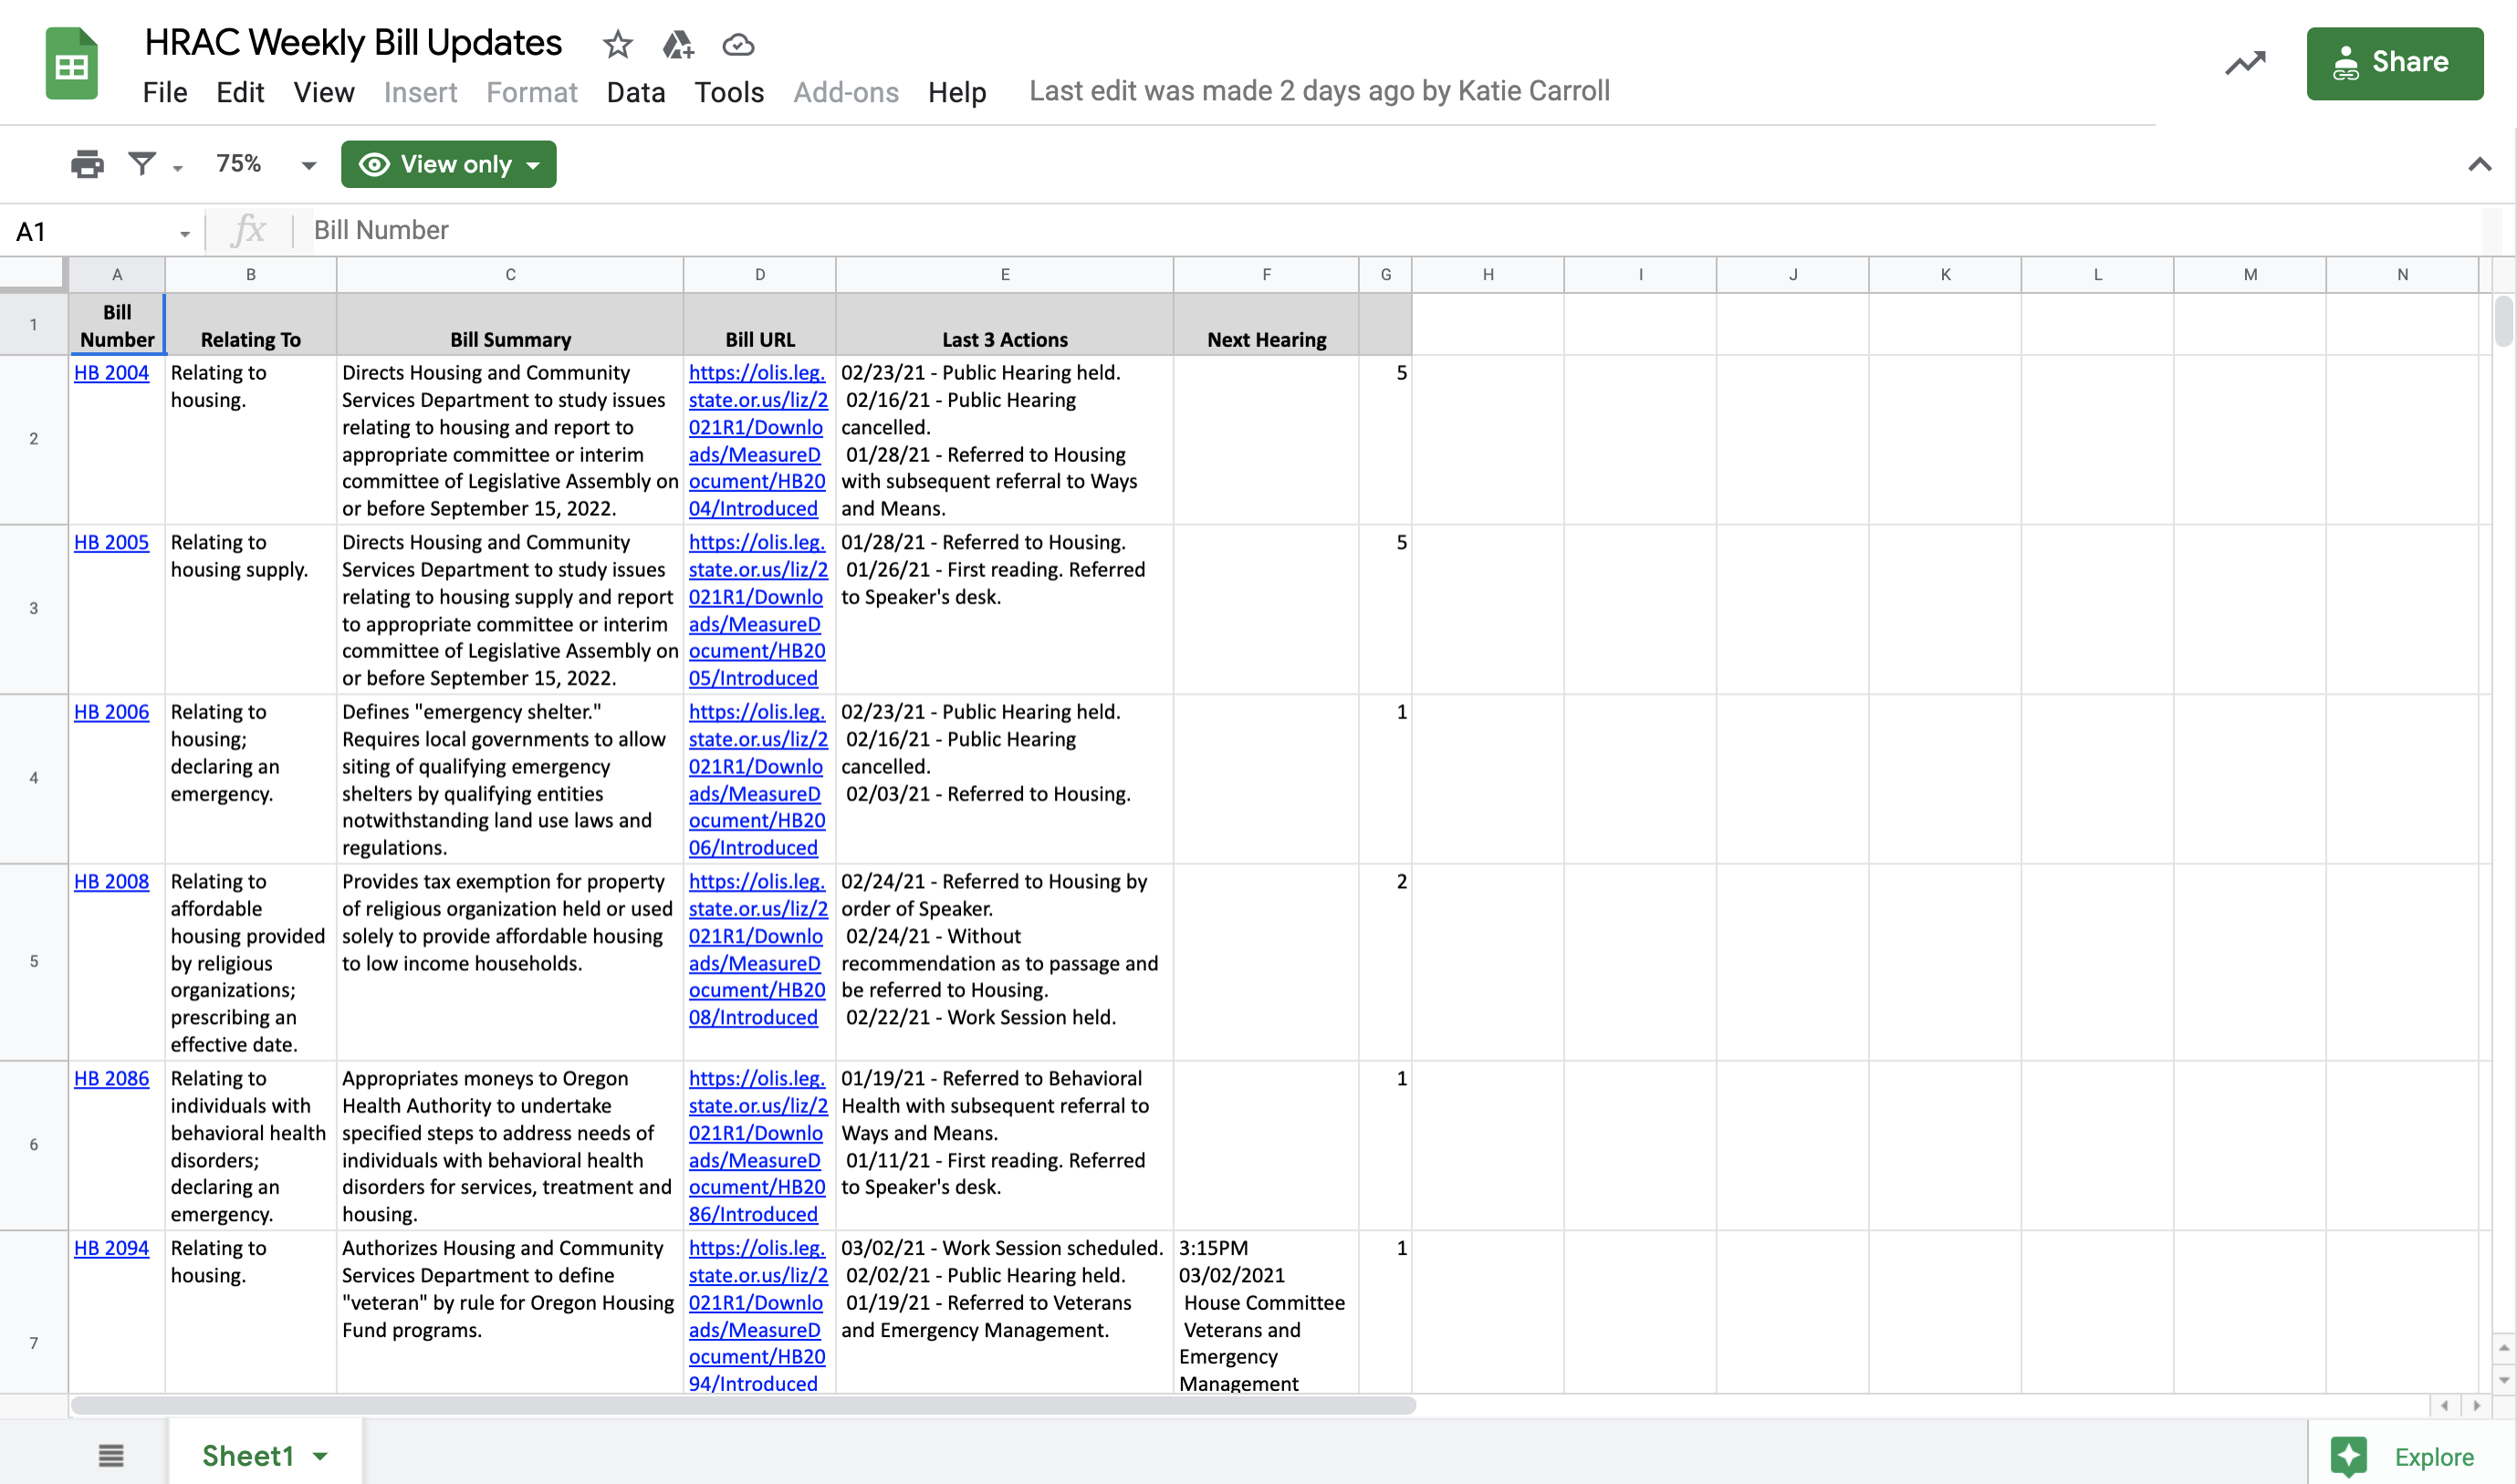 Screenshot of a Google Sheets spreadsheet that is titled "HRAC Weekly Bill Updates".